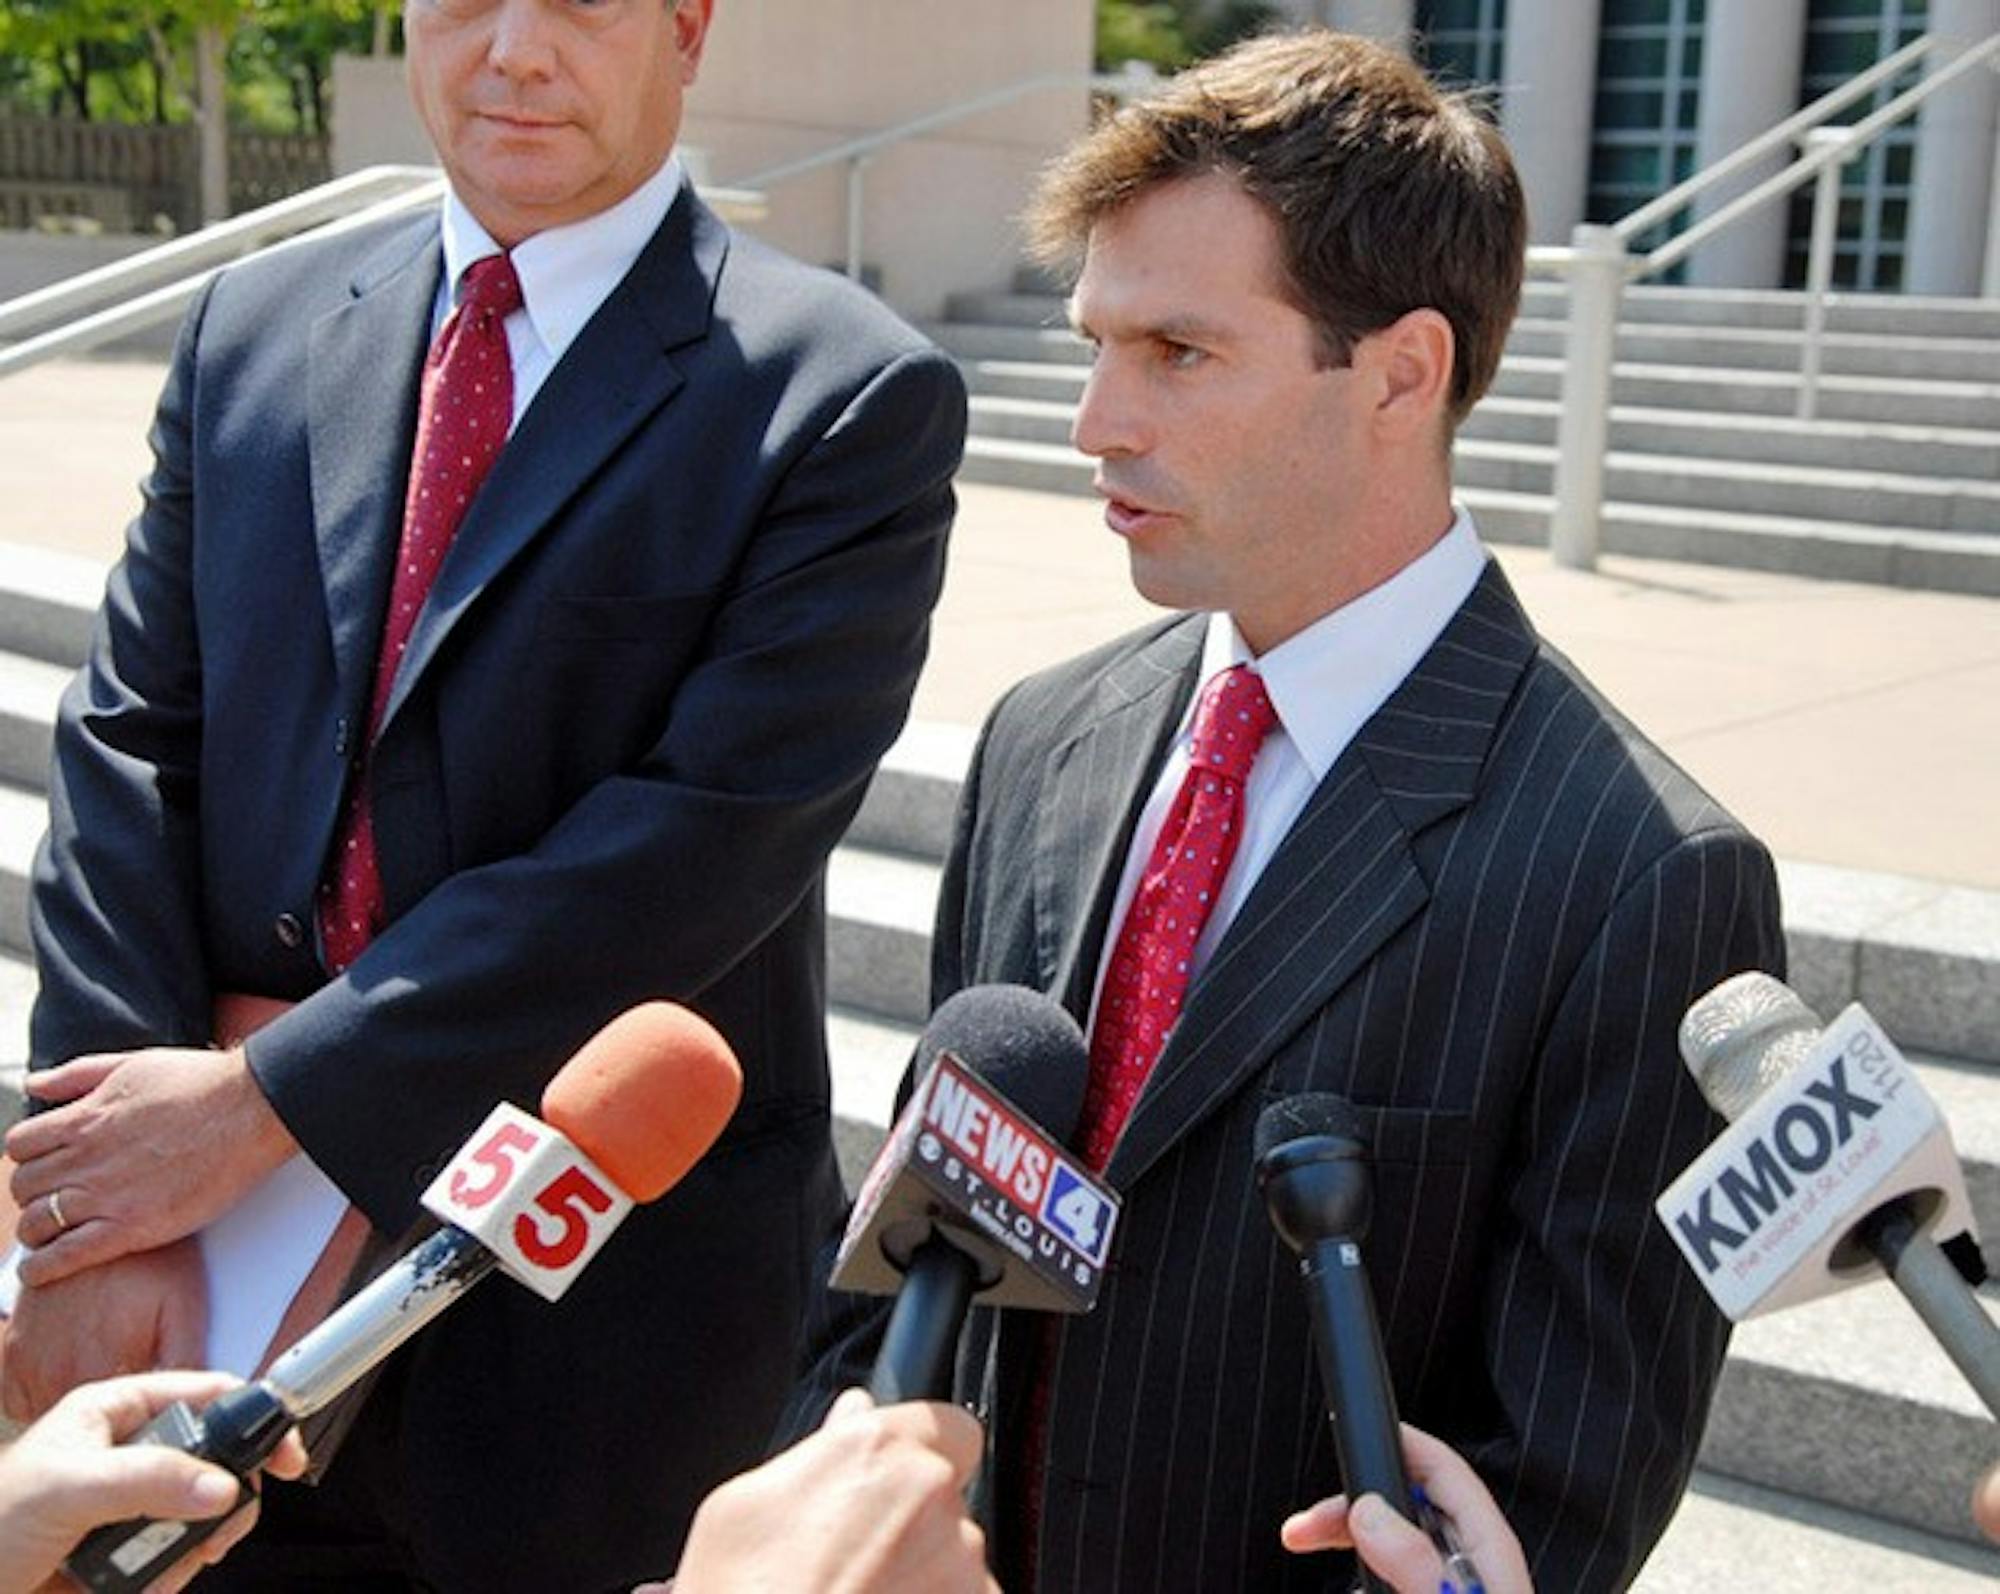 Former Missouri State Senator Jeff Smith (center), 37, speaks with members of the media on the steps of the Thomas F. Eagleton United States Courthouse in St. Louis Tuesday, Aug. 25, 2009. Smith plead guilty to two counts of conspiracy to obstruct justice in relationship to an investigation of his losing 2004 run for Congress. Smith resigned his seat in the state senate today. At left is attorney Richard Greenberg. (AP PHOTO/Sid Hastings)
BC-MO--Lawmakers-Investigation